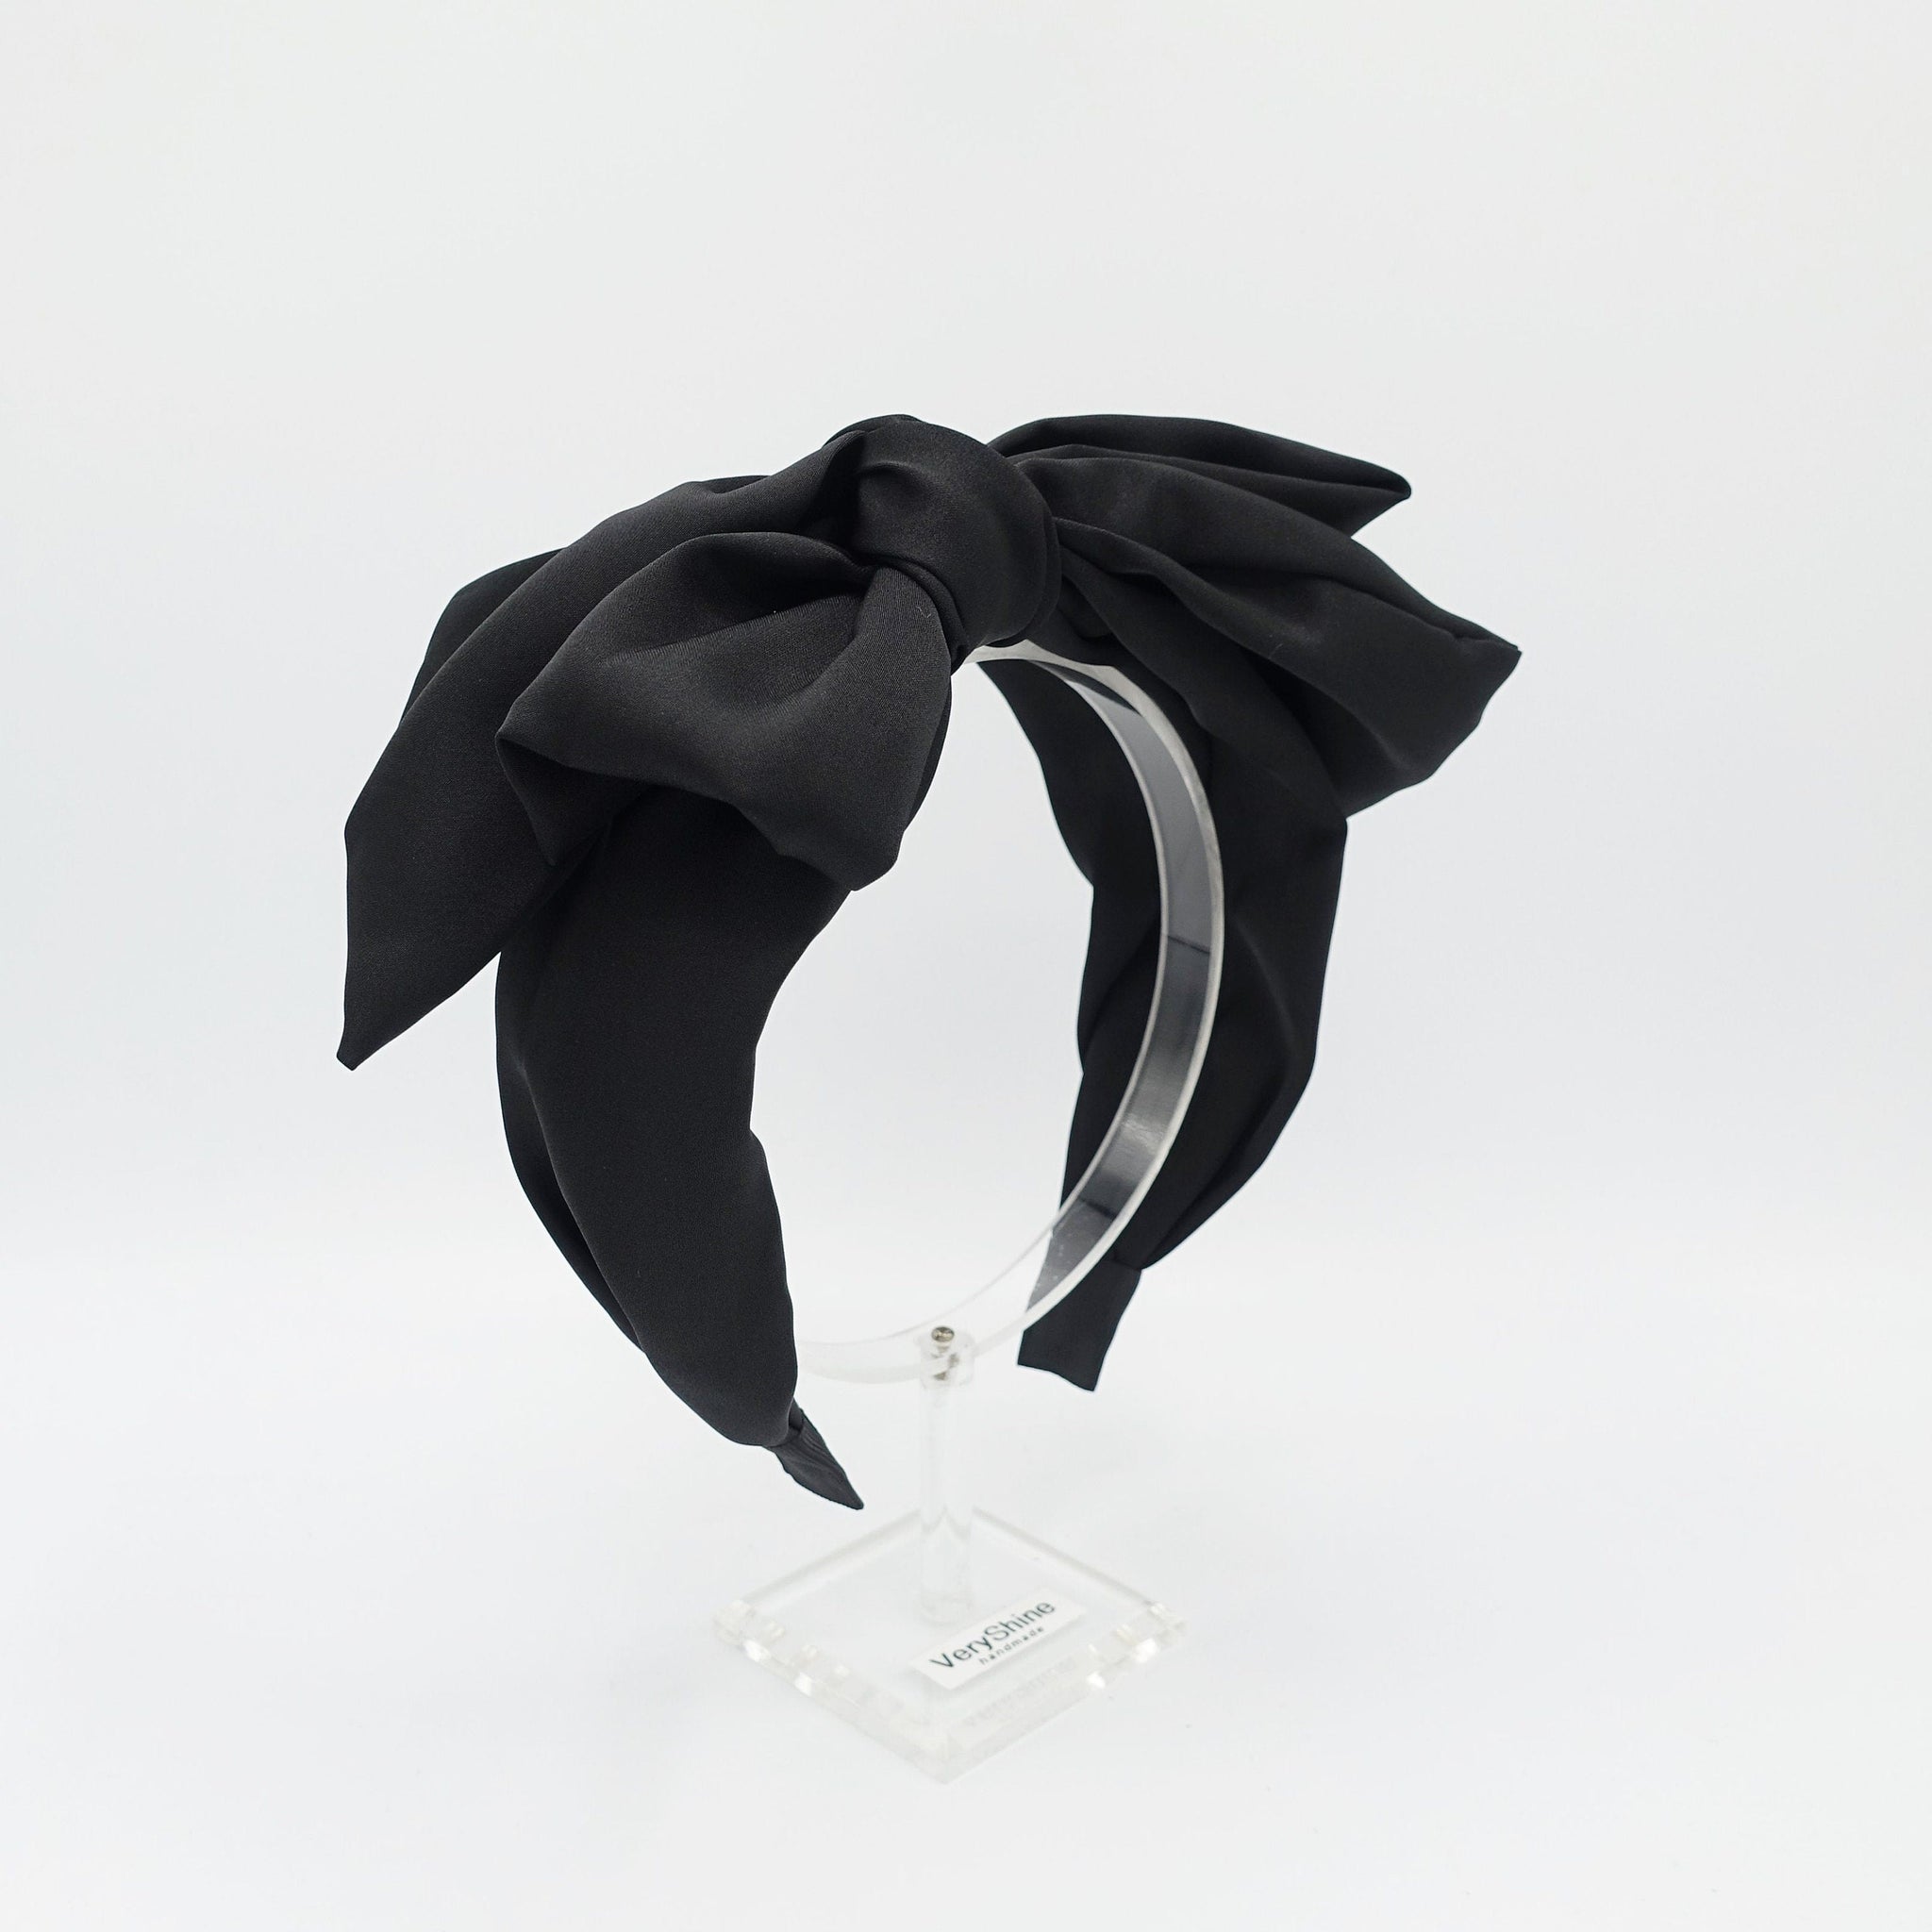 veryshine.com Hair Accessories silk satin layered bow knot headband loose droopy hairband for women